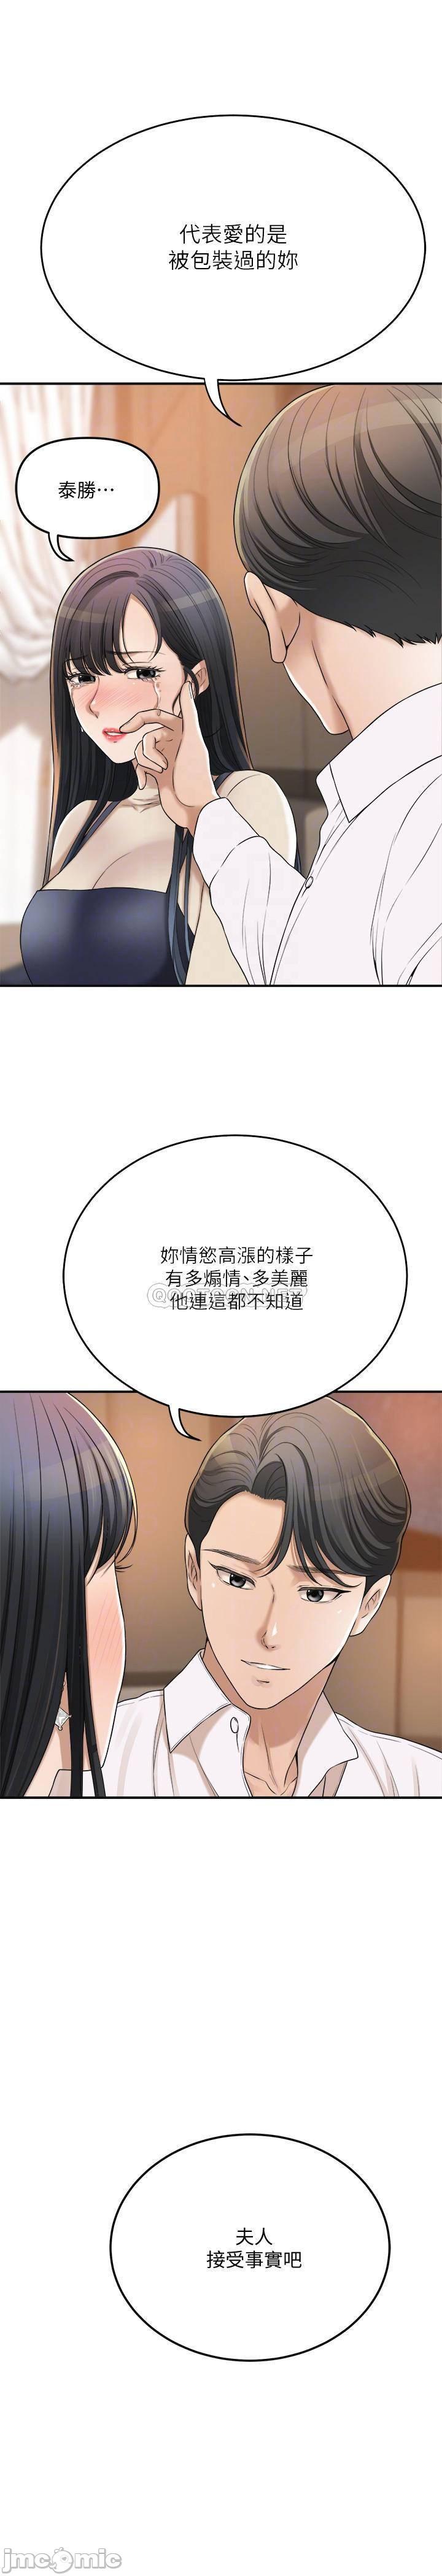 Stripping 抑欲人妻41-50（完结） India - Page 8